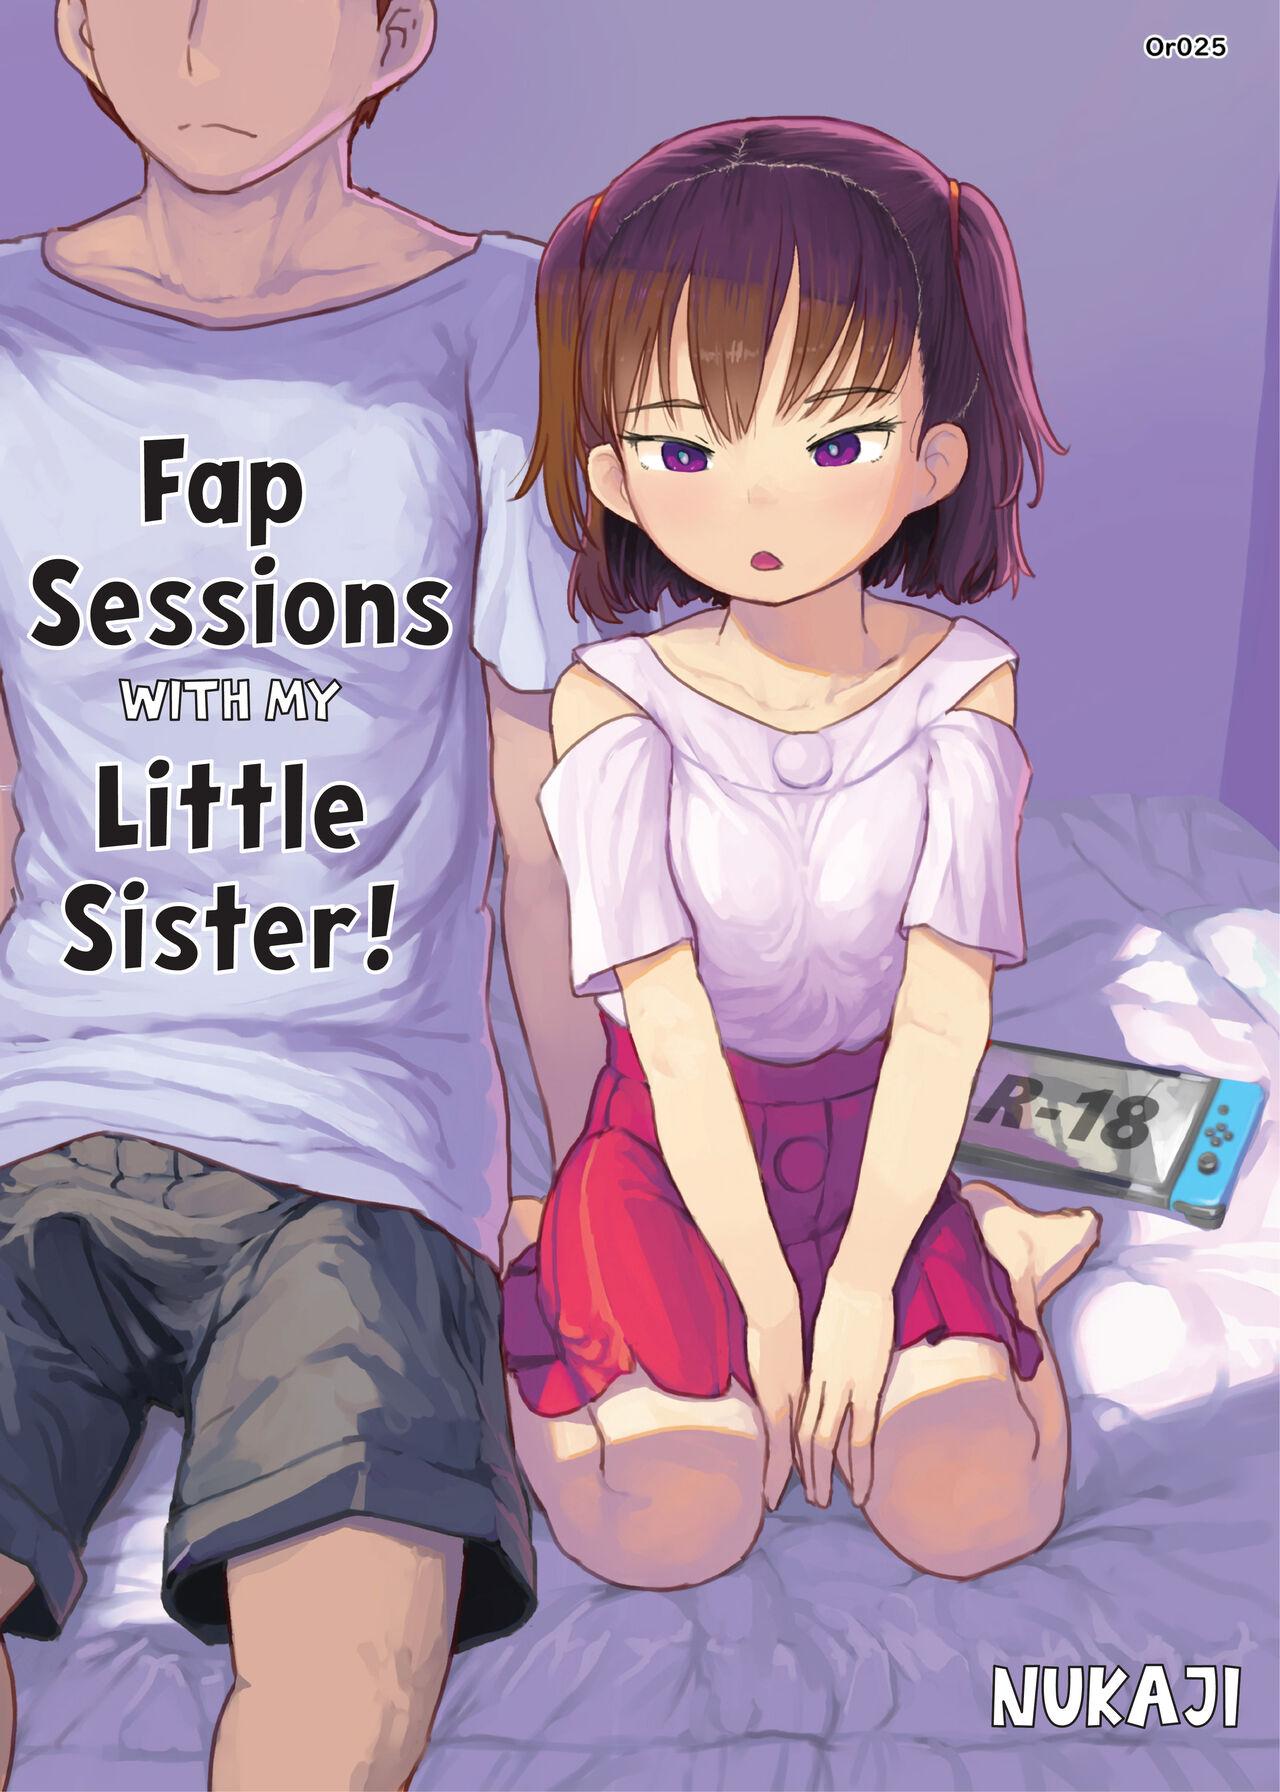 Swingers Imouto to Nuku | Fap Sessions with my Little Sister! - Original Eating - Picture 1